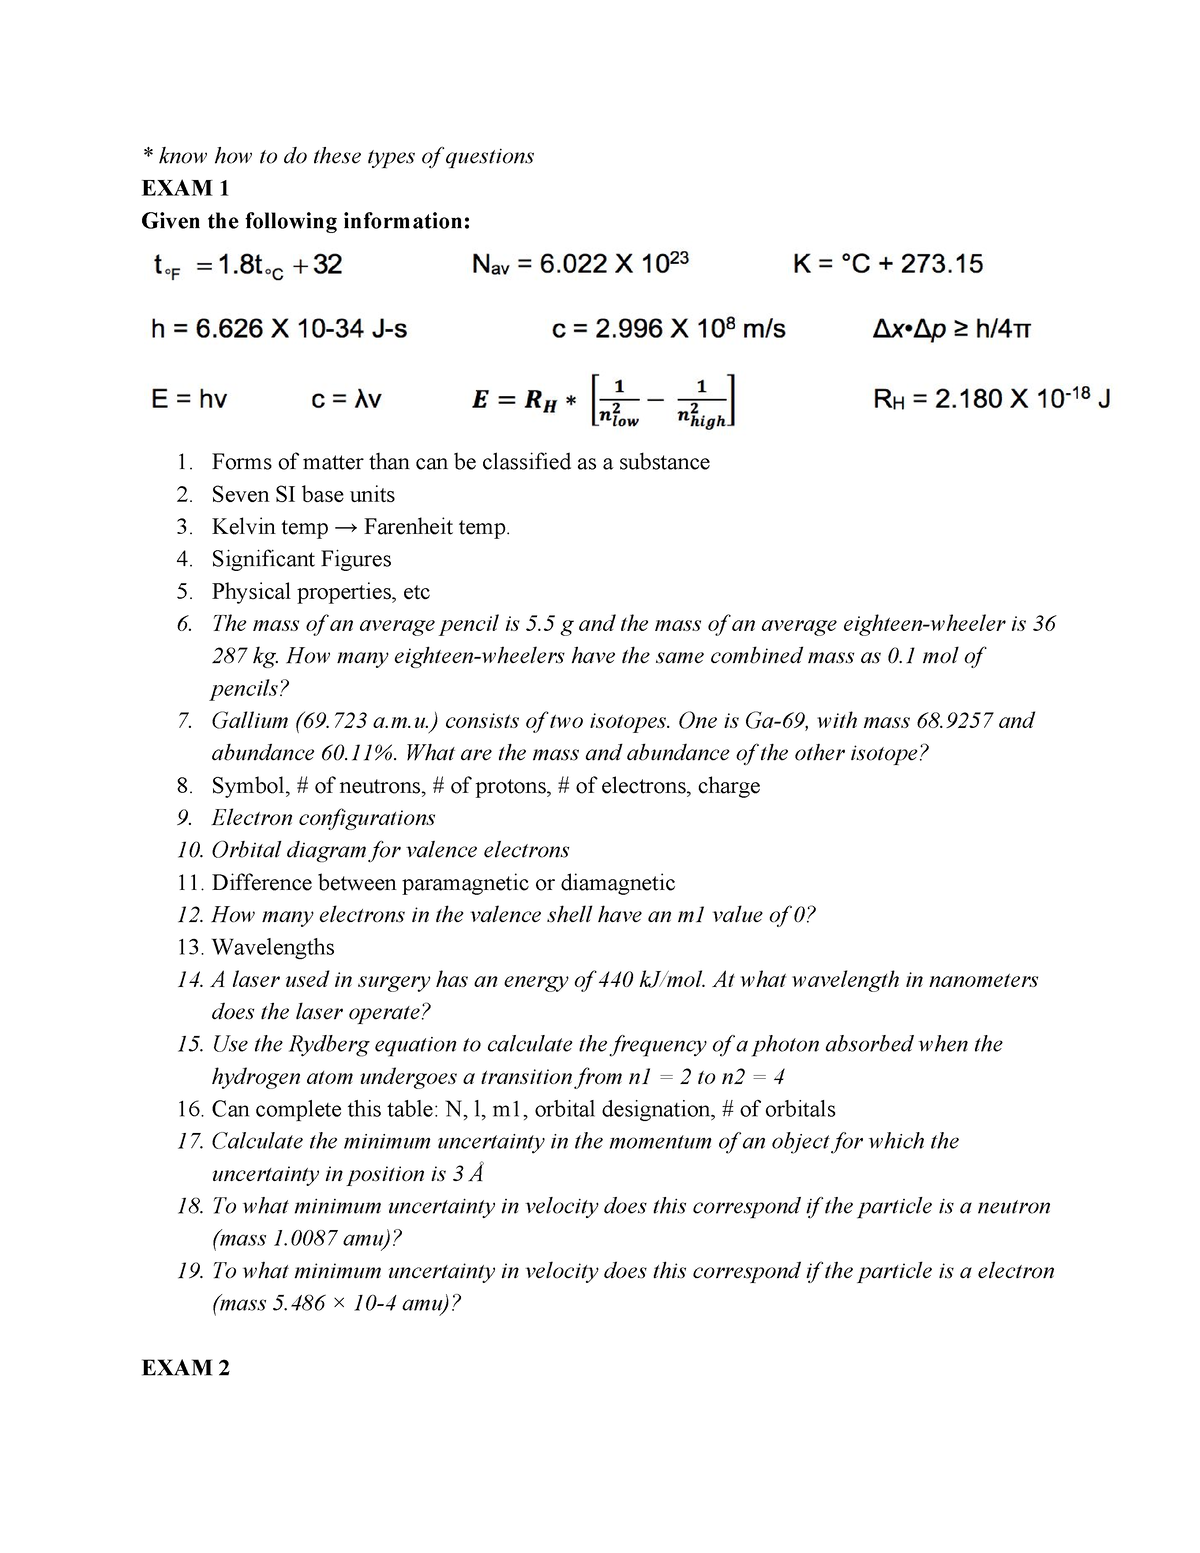 1124Q CHEM Final EXAM - know how to do these types of questions EXAM 1 ...